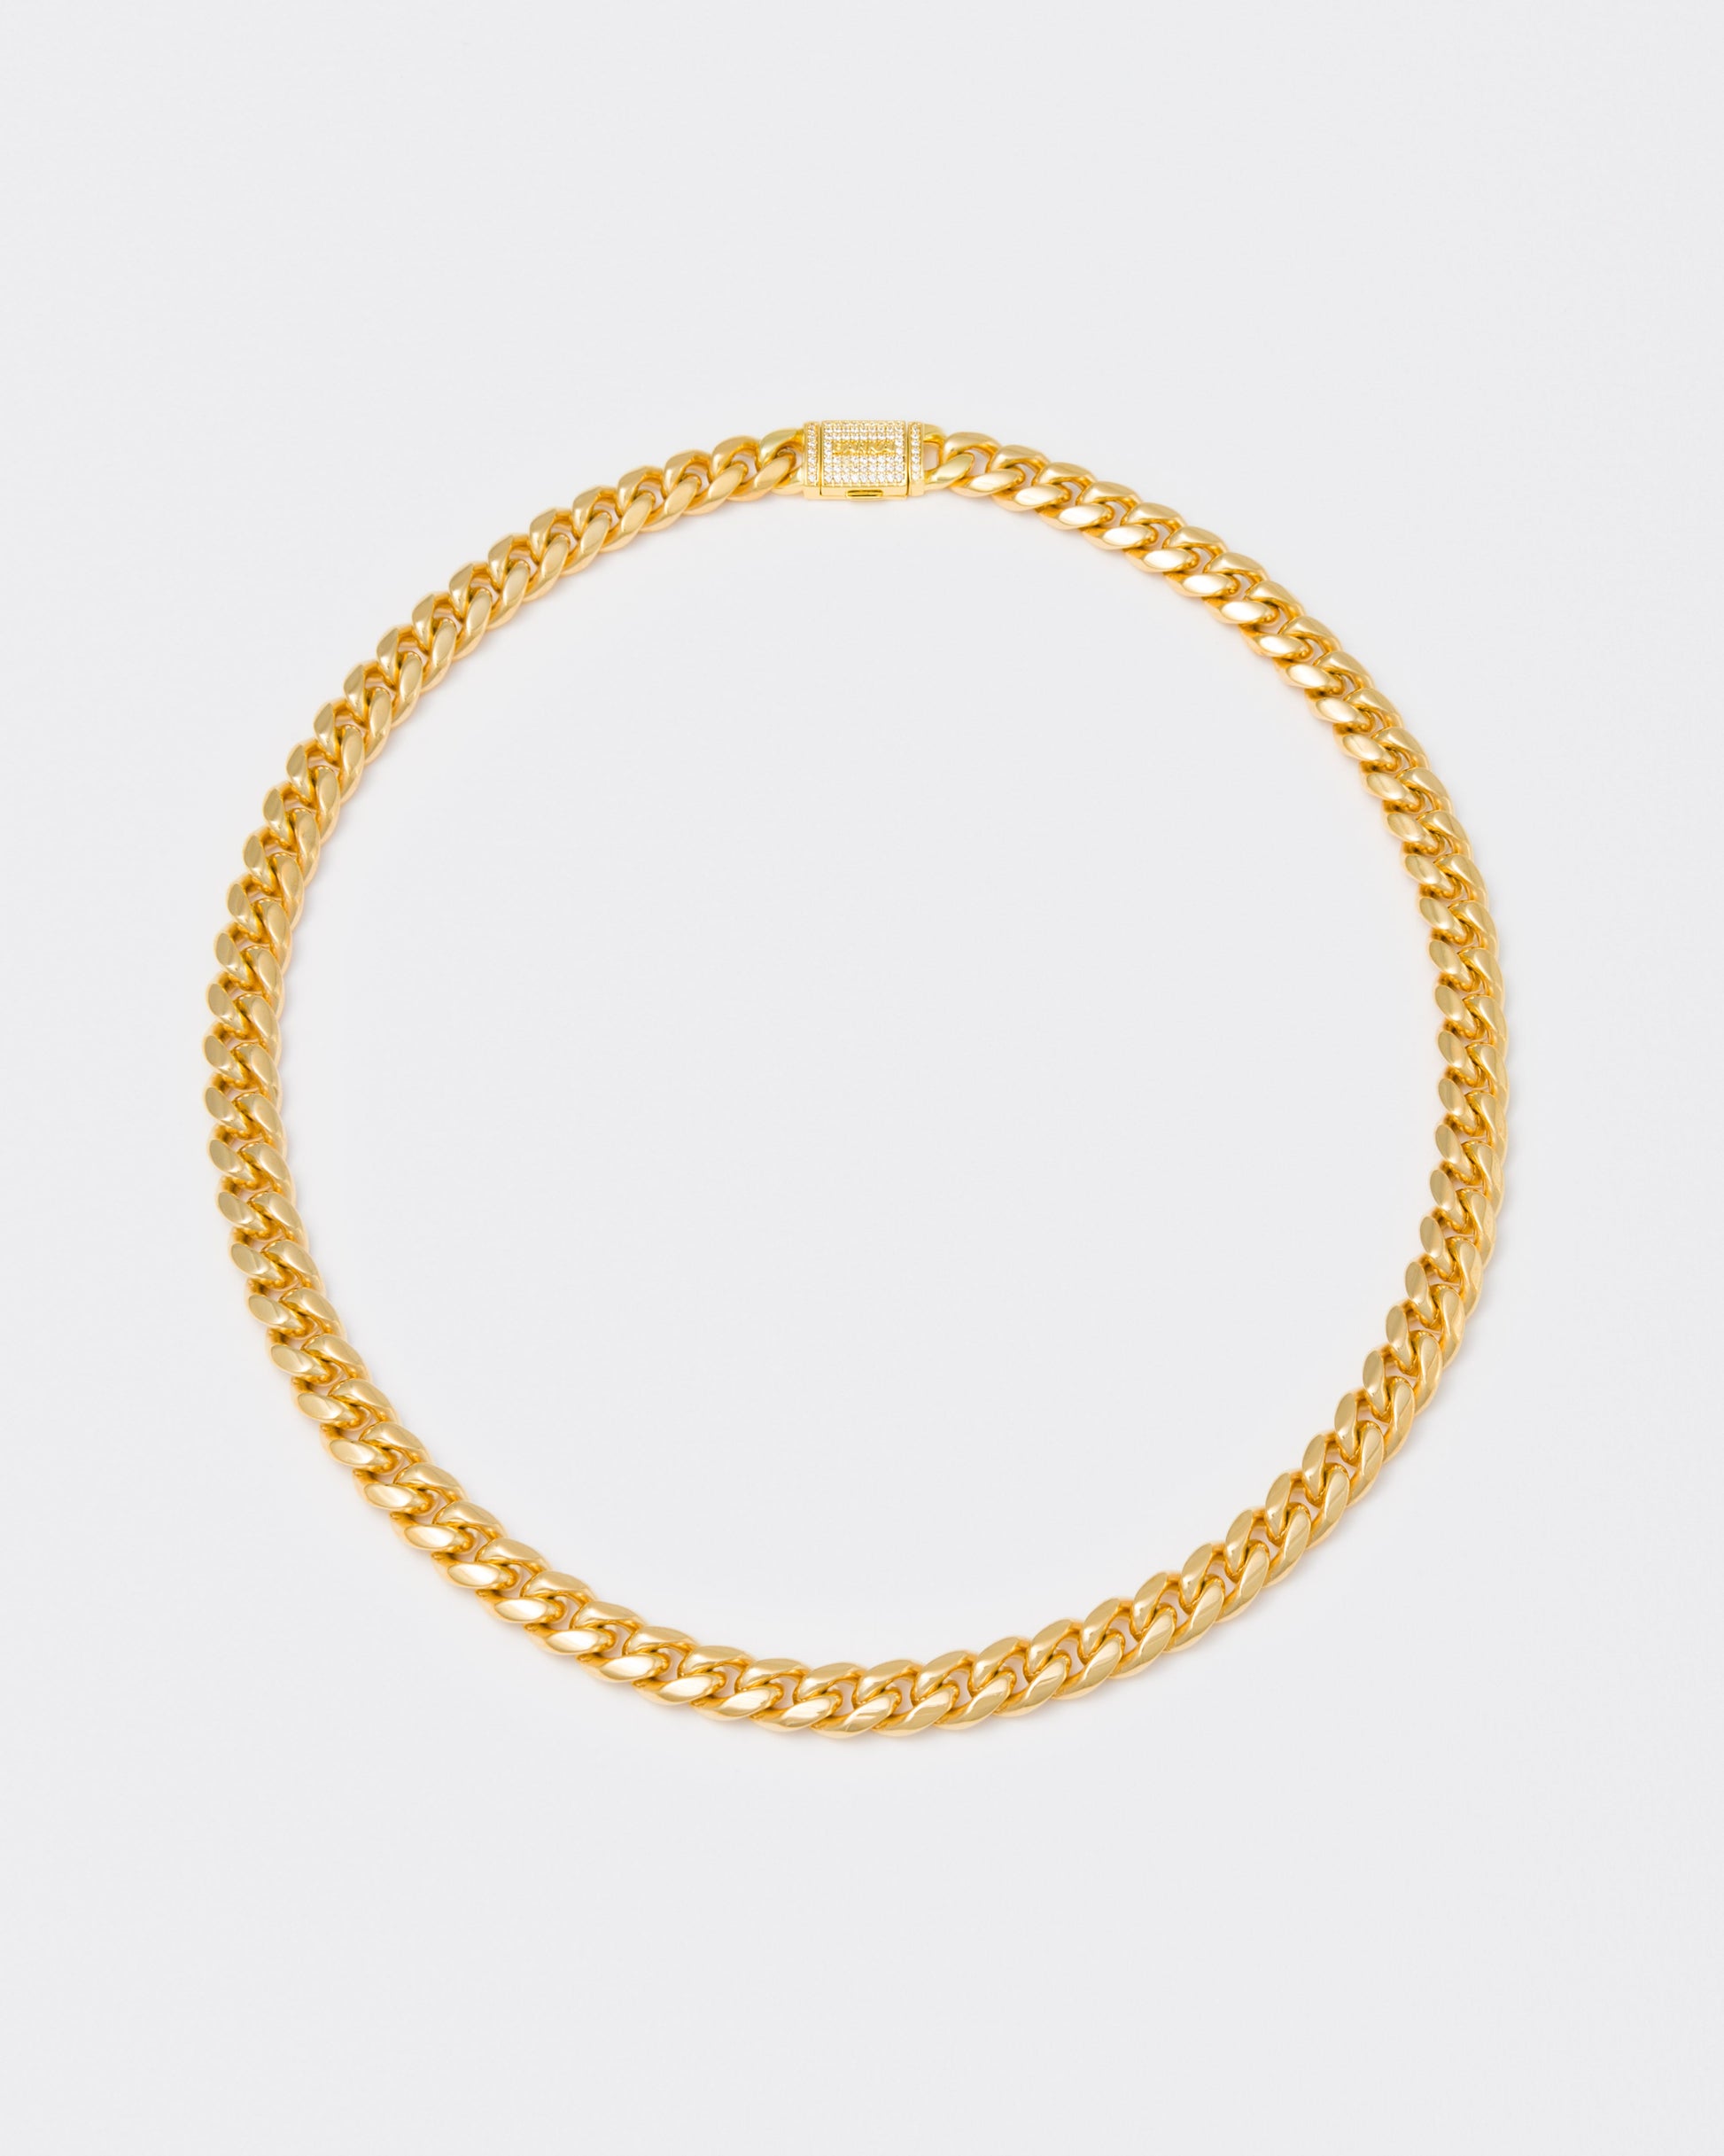 18k yellow gold coated cuban chain necklace with hand-set micropavé stones in white